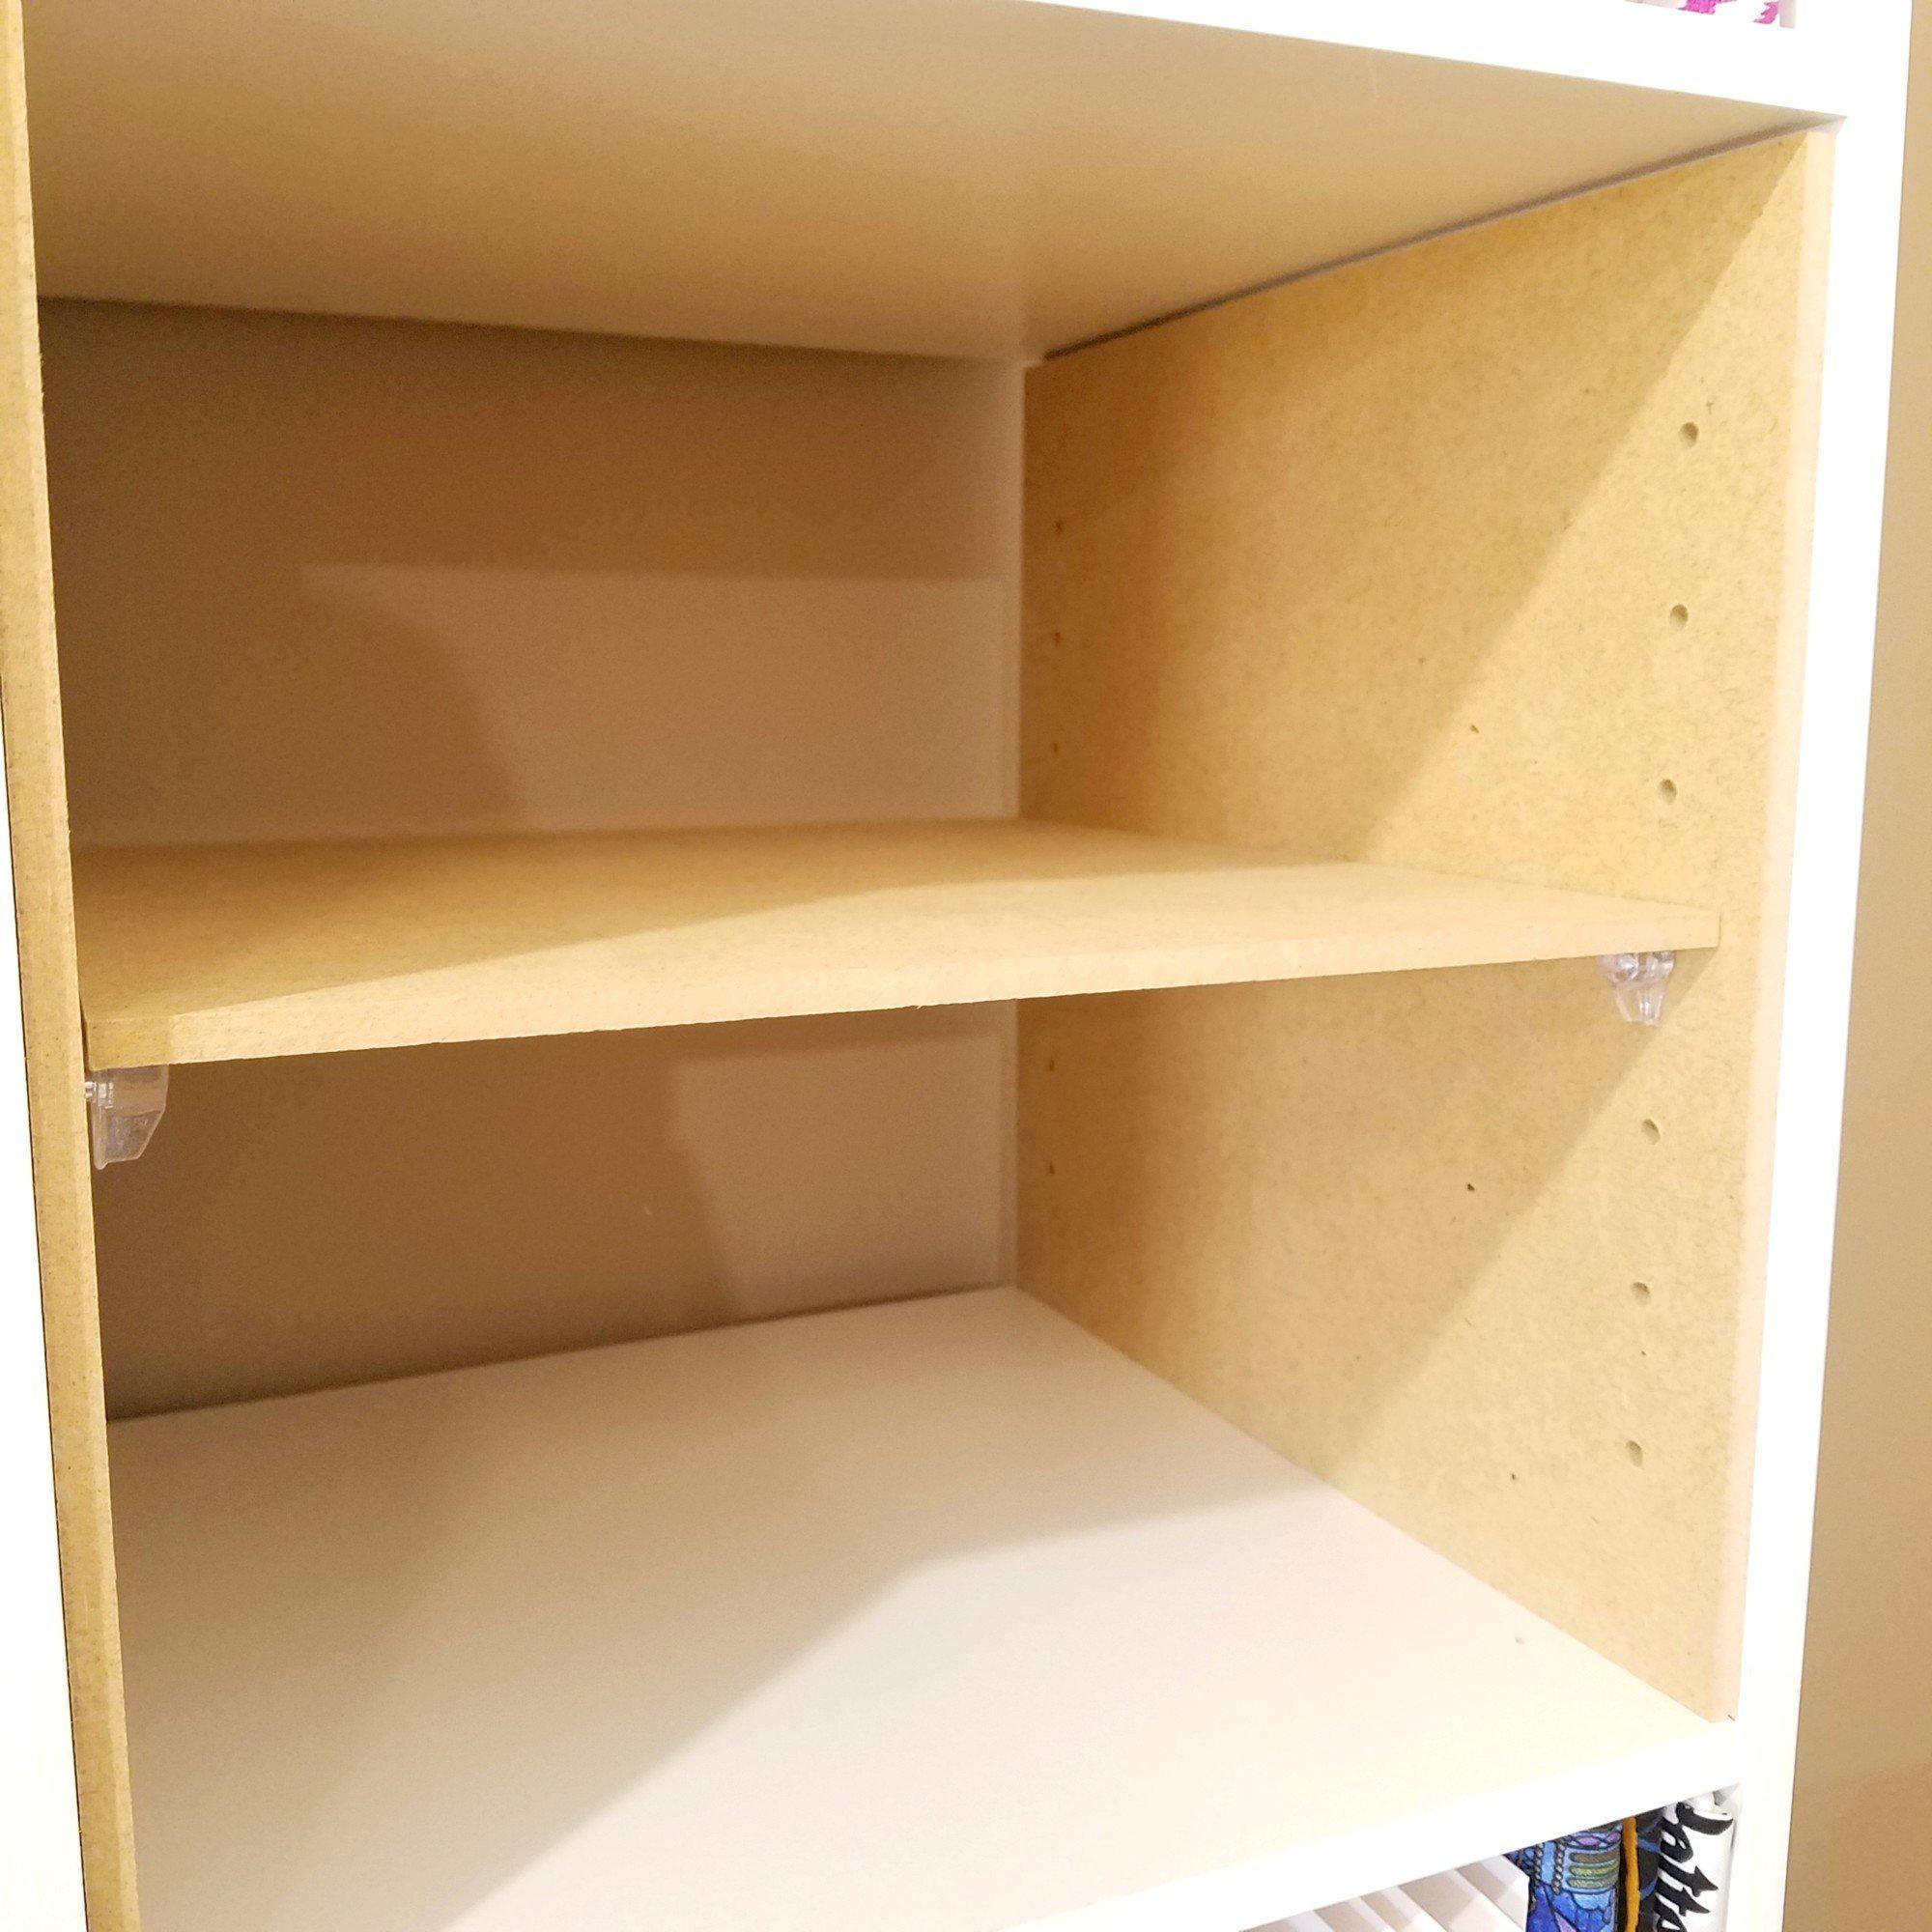 Adjustable Cubby Organizer Cube Insert for Cube Storage Shelves The Steady Hand